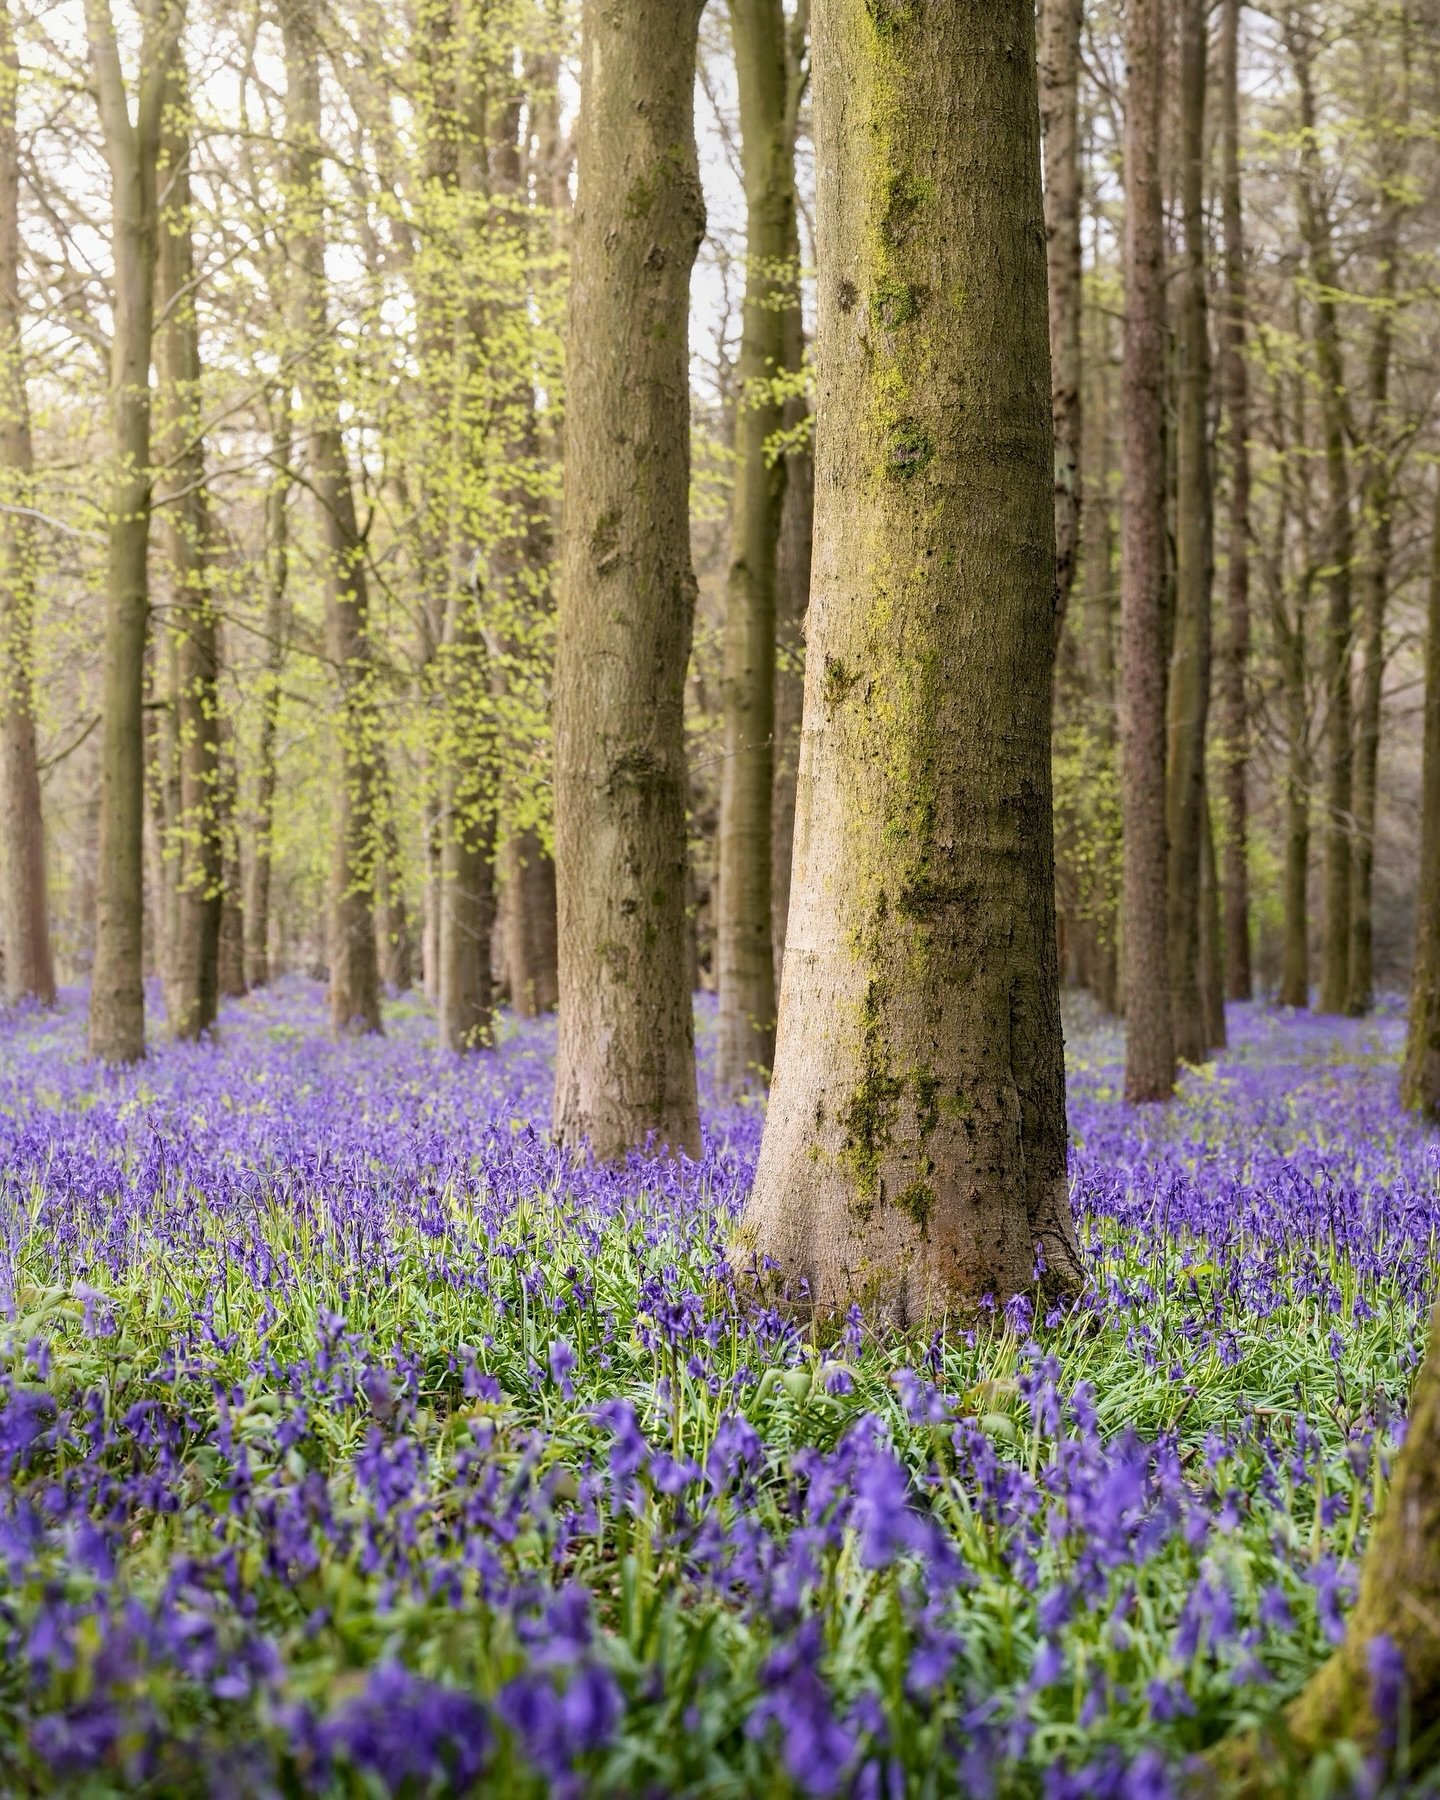 I finally made it over to the Ashridge Estate to see the bluebells. I&rsquo;ve been meaning to visit for years but timing has never worked out. I decided not to wait for a sunny day, opting for drizzle and making the best photographically of whatever